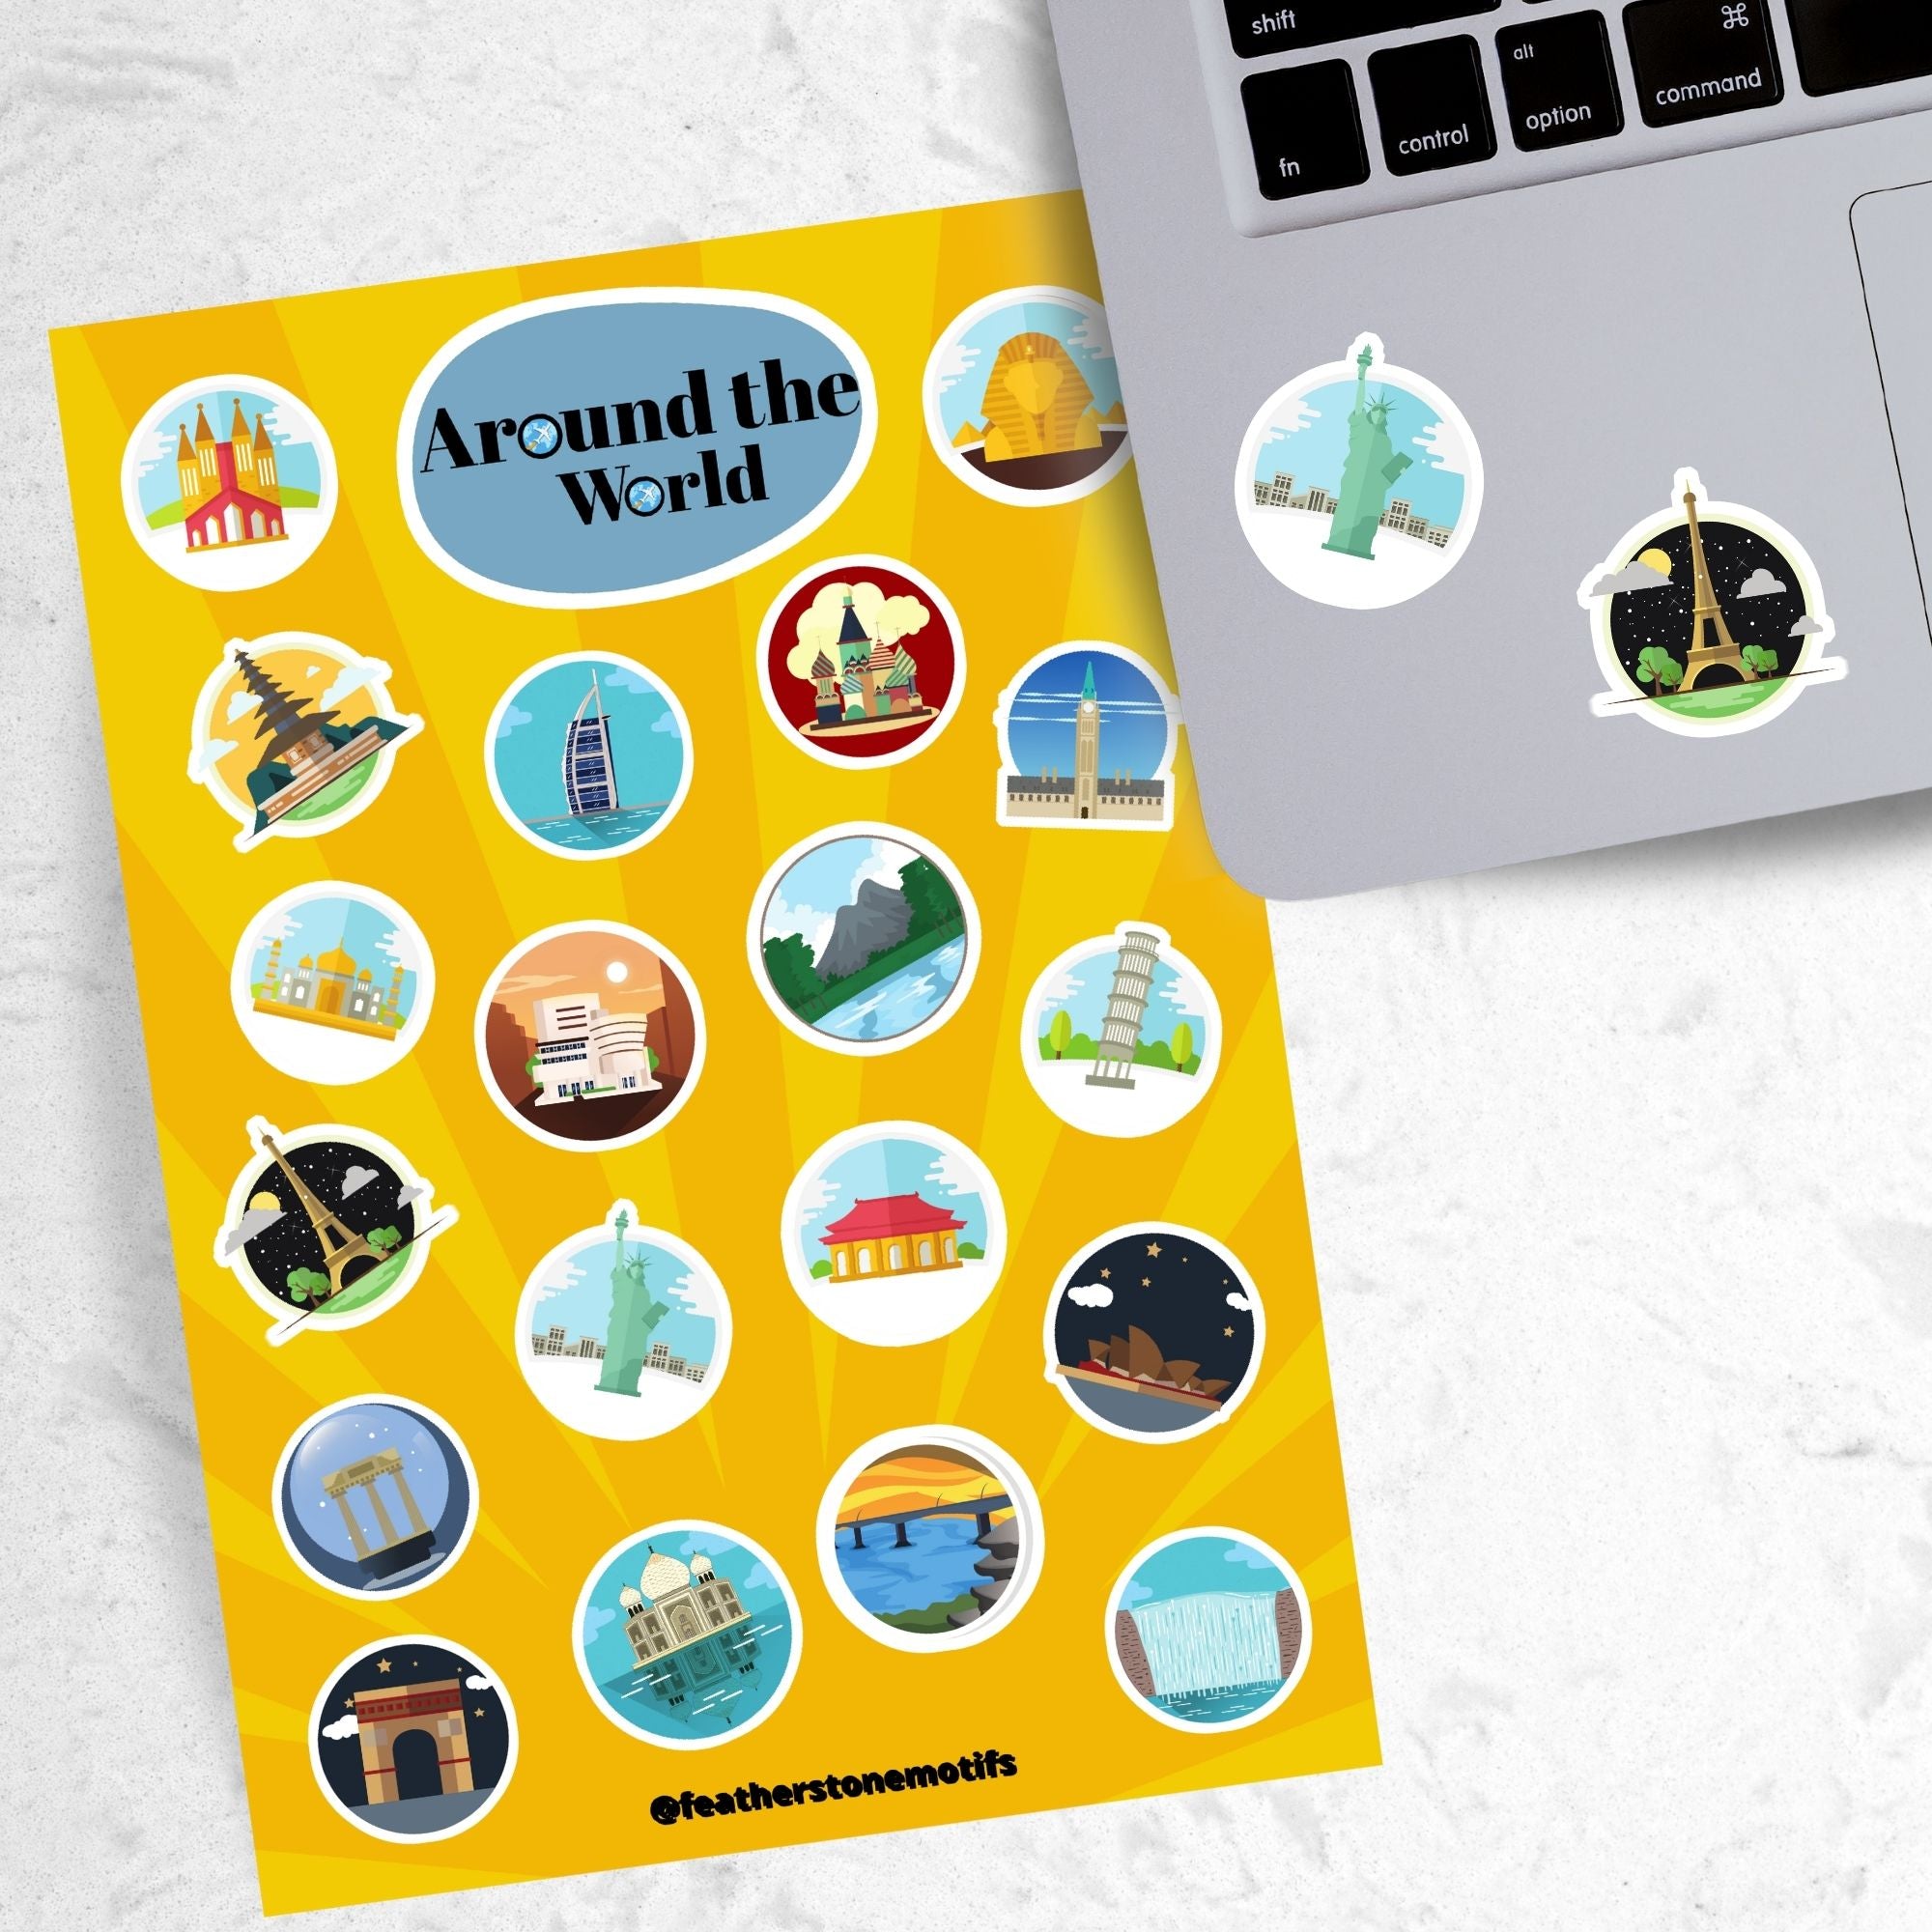 Our Around the World sticker sheet collection has sticker images of iconic travel destinations! This sheet has a yellow background with 20 different stickers. This image shows the sticker sheet next to an open laptop with stickers of the Statue of Liberty and the Eifel Tower applied below the keyboard.